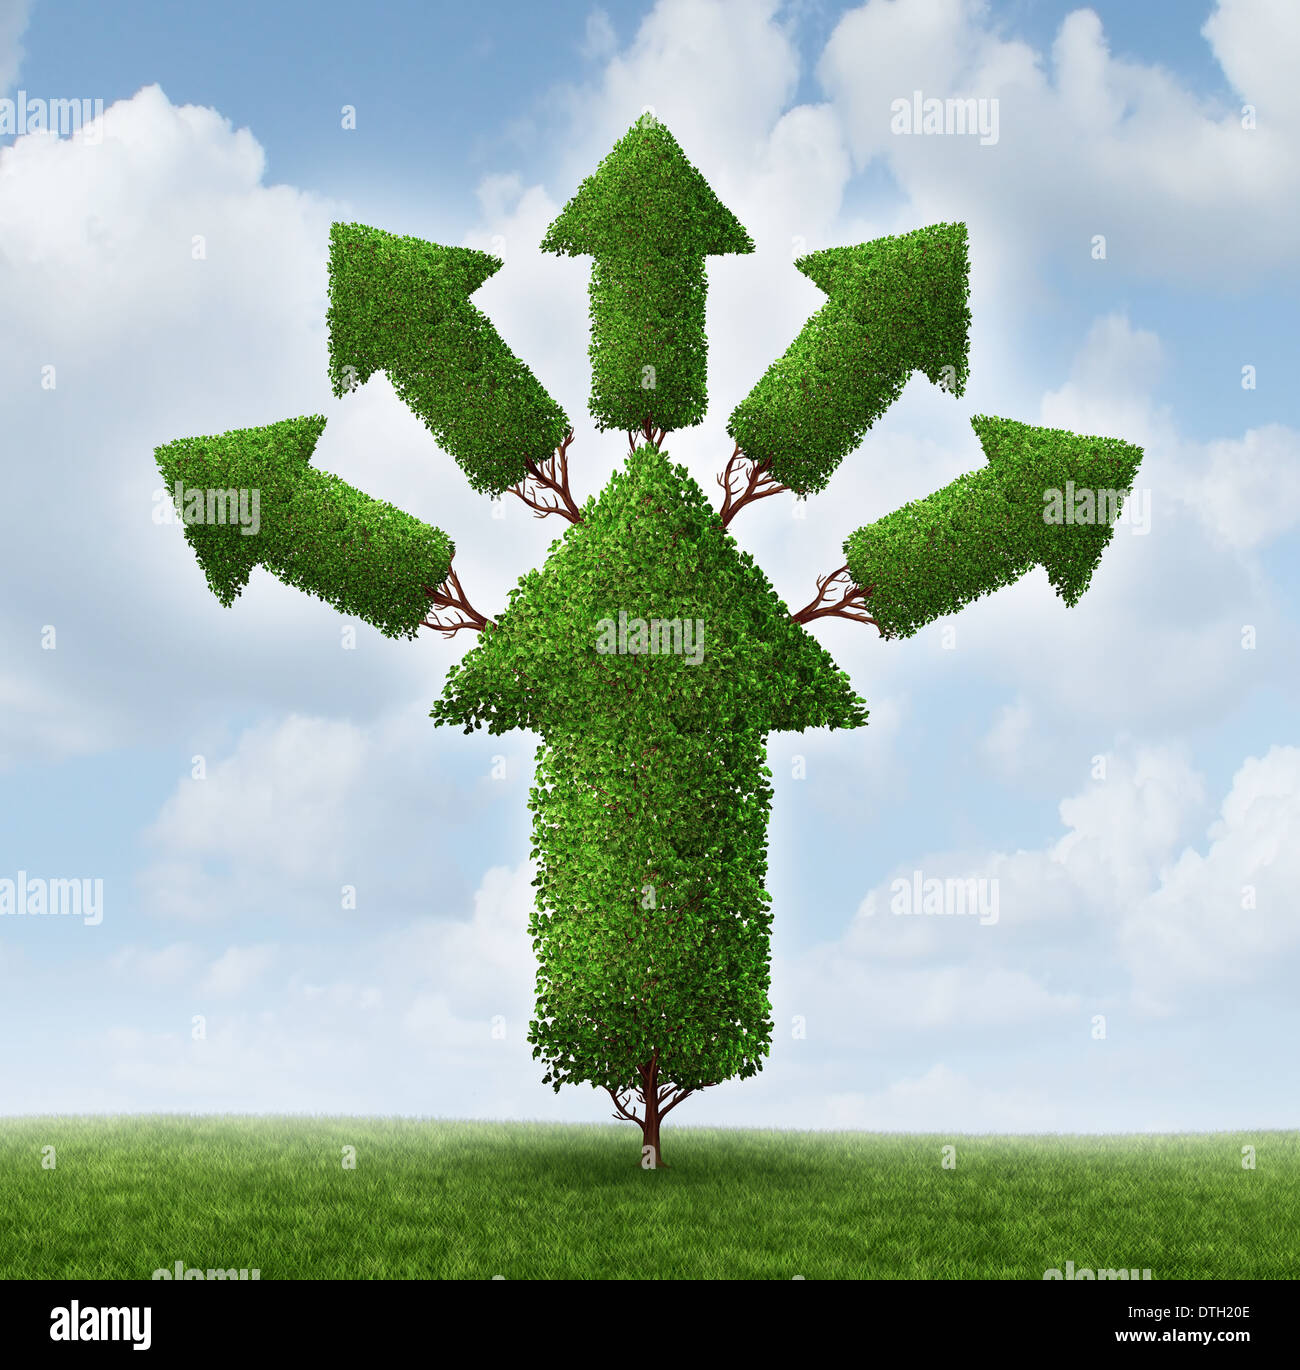 Success expansion business concept as a tree shaped as an upward arrow with plant stems branching out and growing smaller arrows as a metaphor for increased profits potential and healthy future. Stock Photo